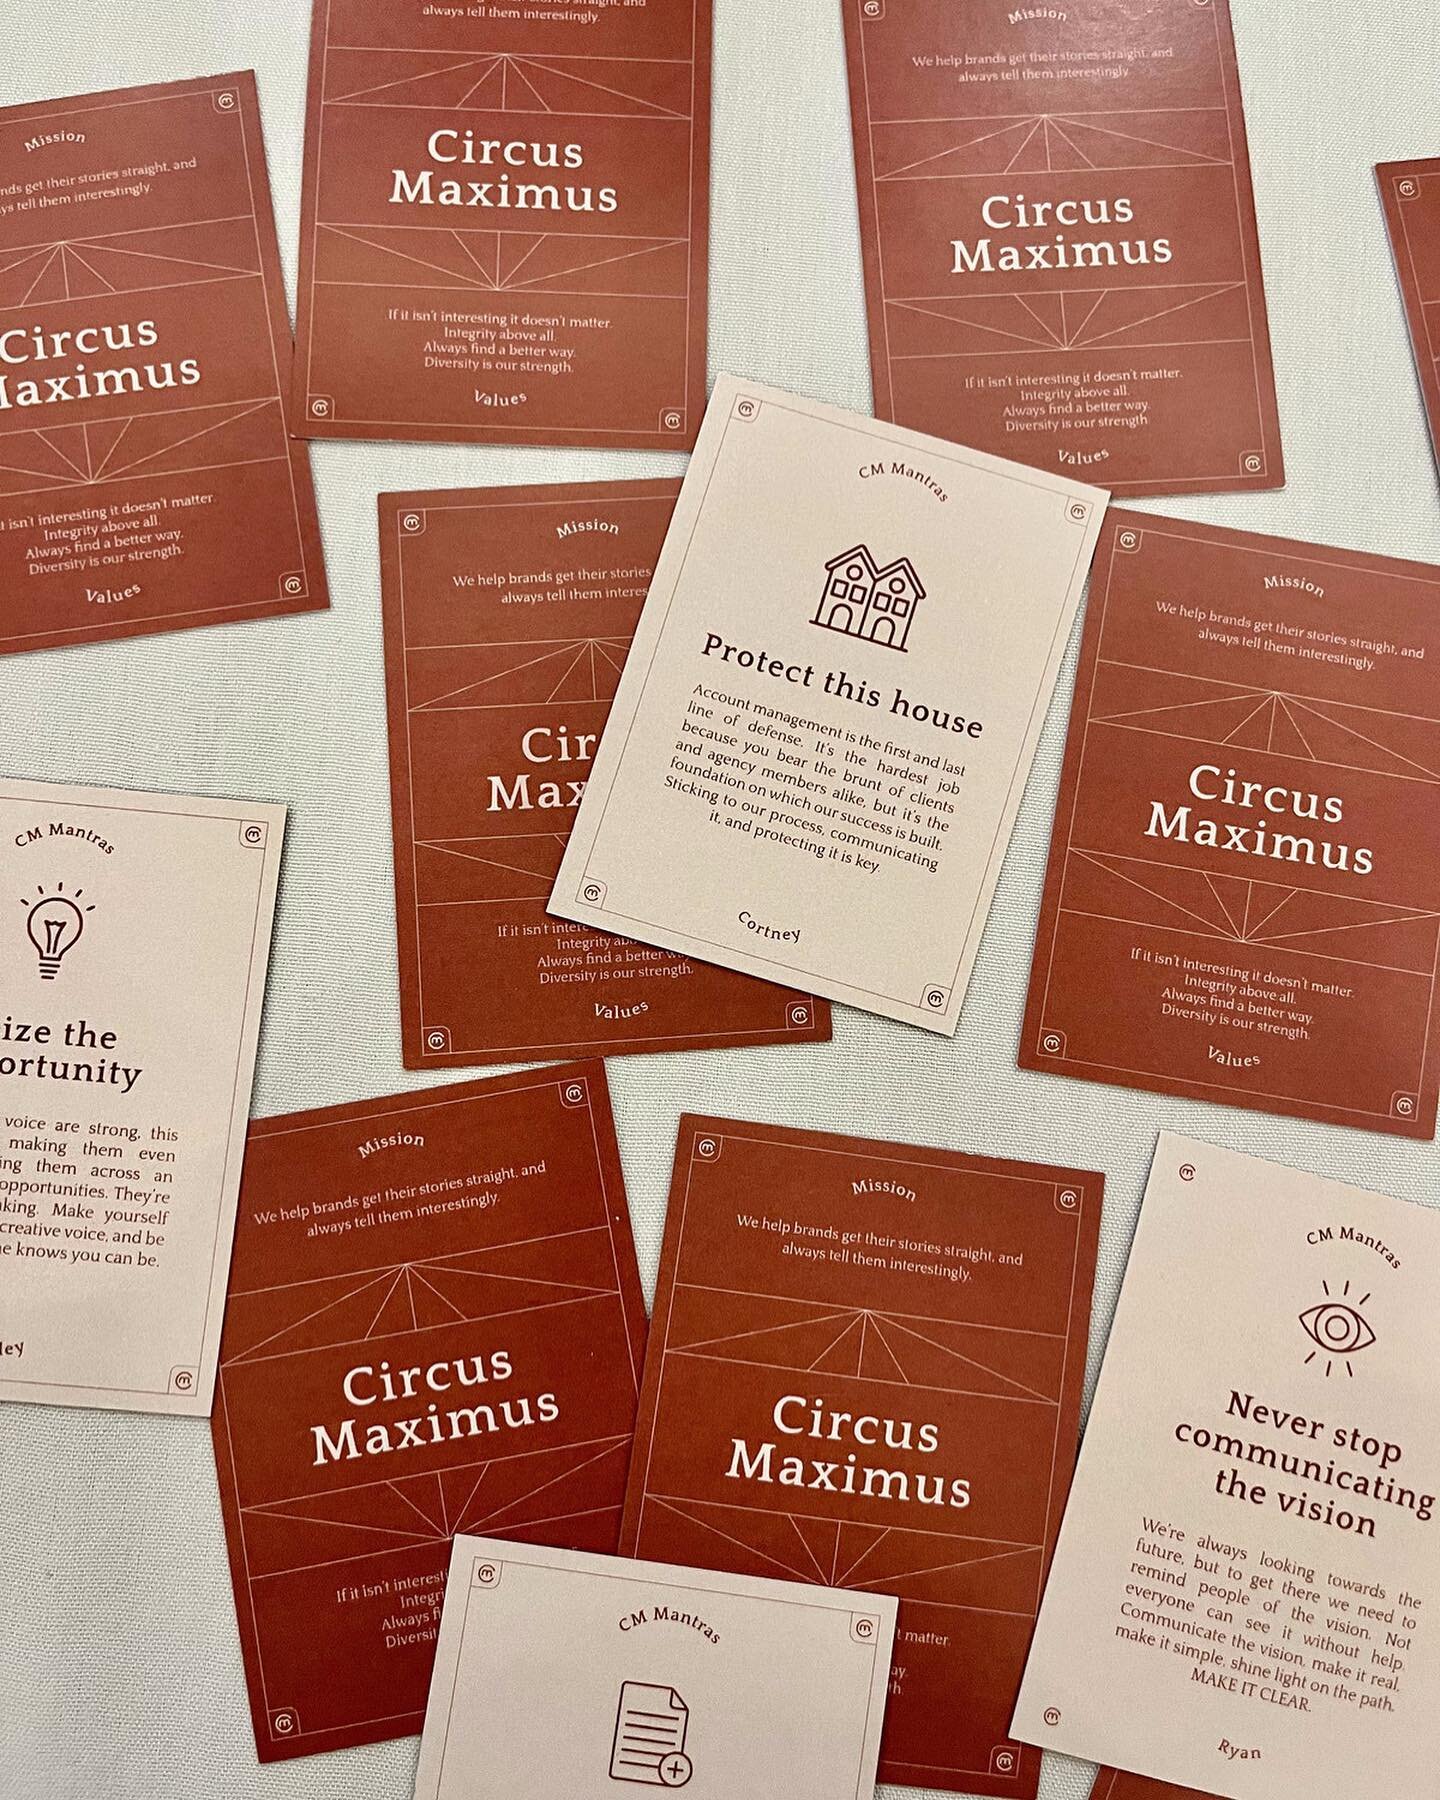 It's all in the cards 🪄🔮

Mantras we live by at CM:
👀 If it isn't interesting, it doesn't matter.
🫡 Integrity above all.
👍 Always find a better way.
🏆 Diversity is our strength.

#crcsmxms #team #mantras #values #advertising